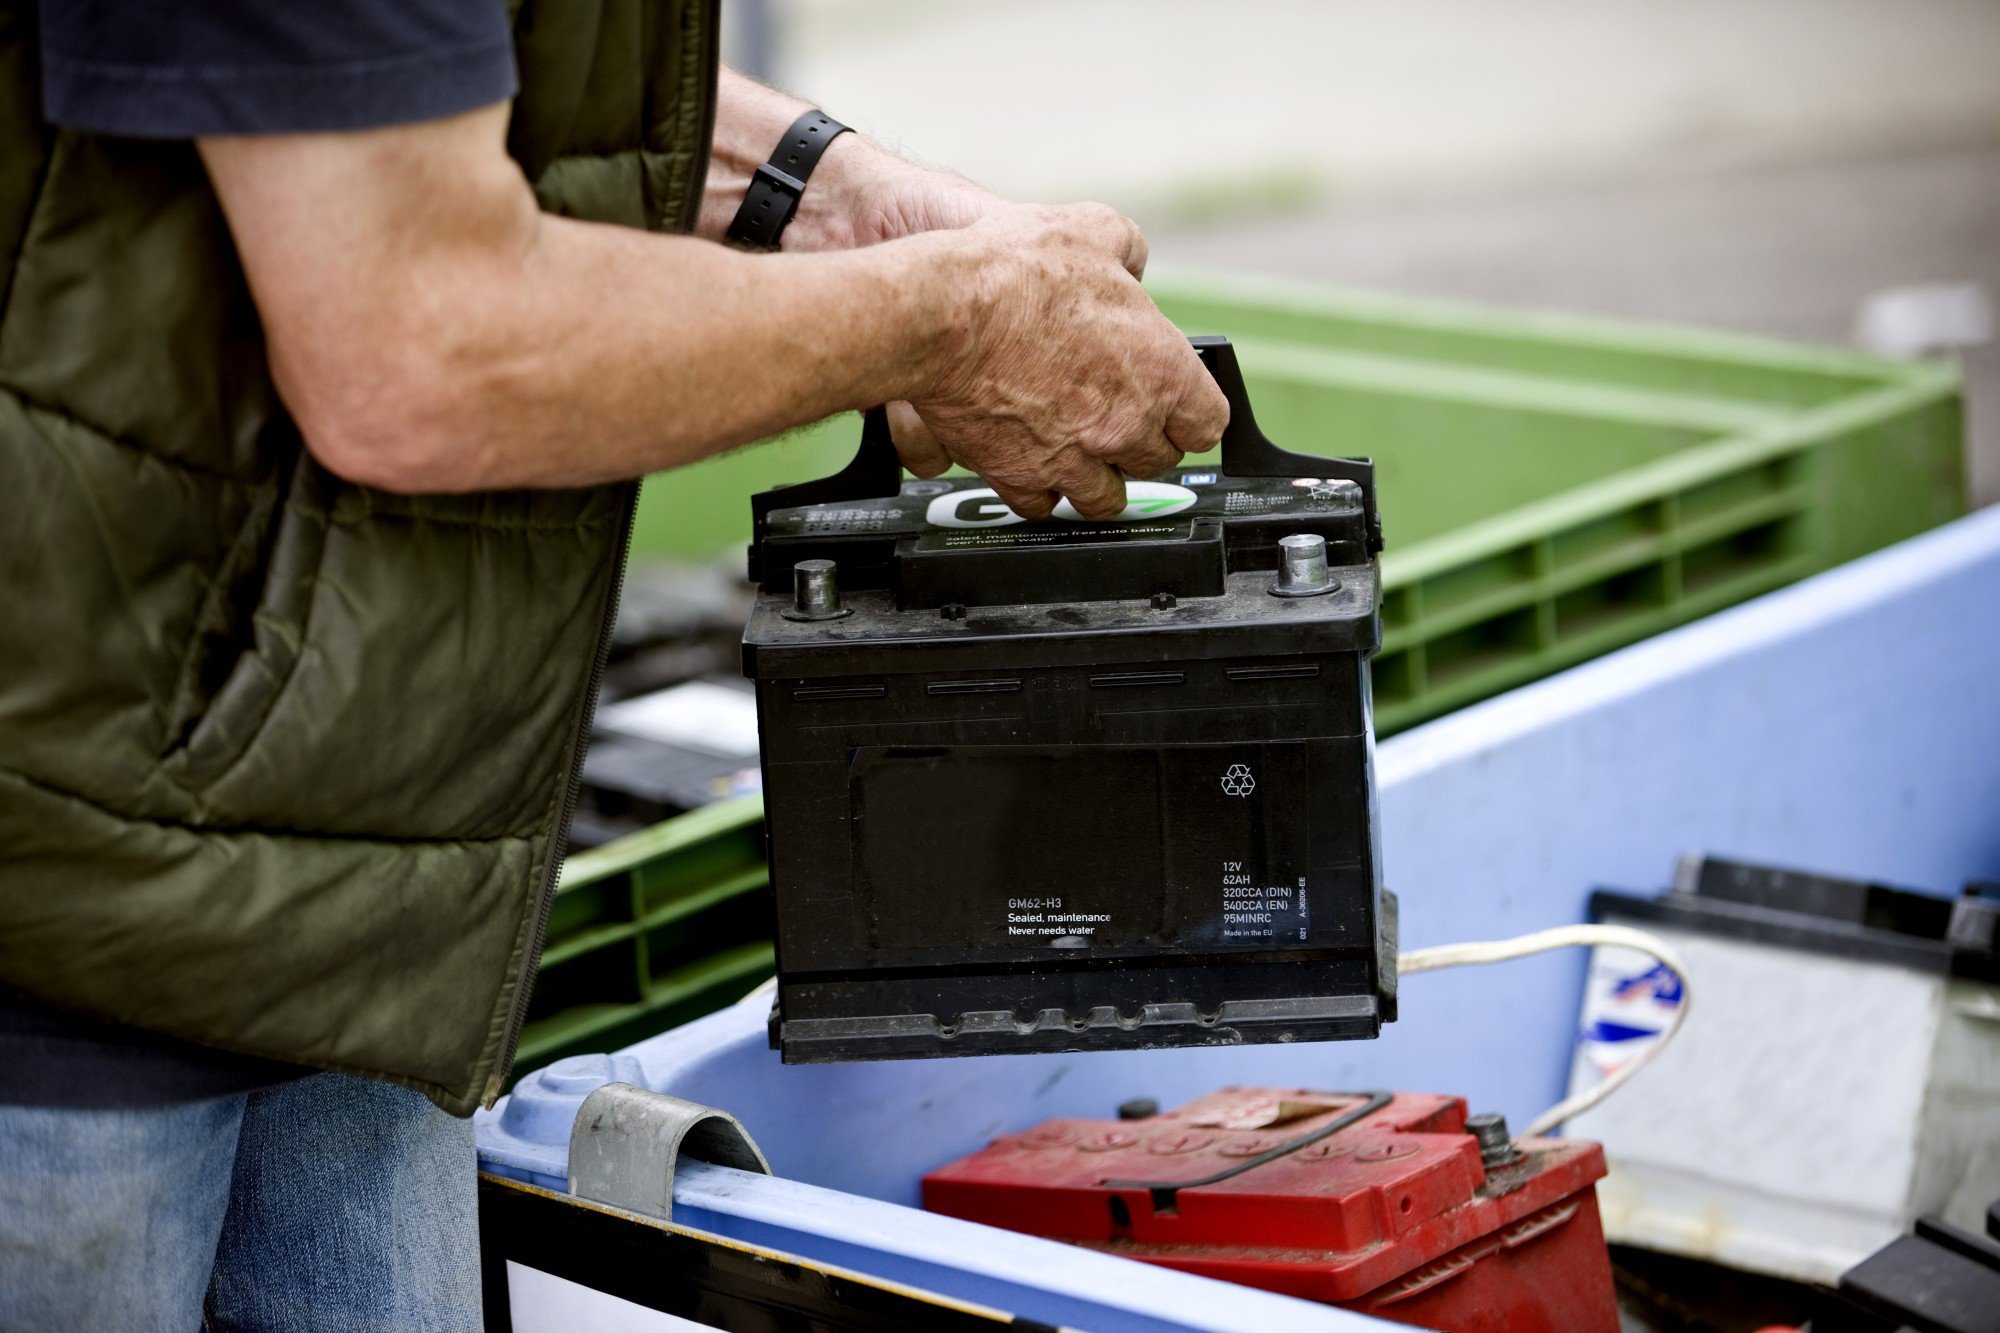 How Often to Replace Car Battery: 5 Auto Tips From the Experts